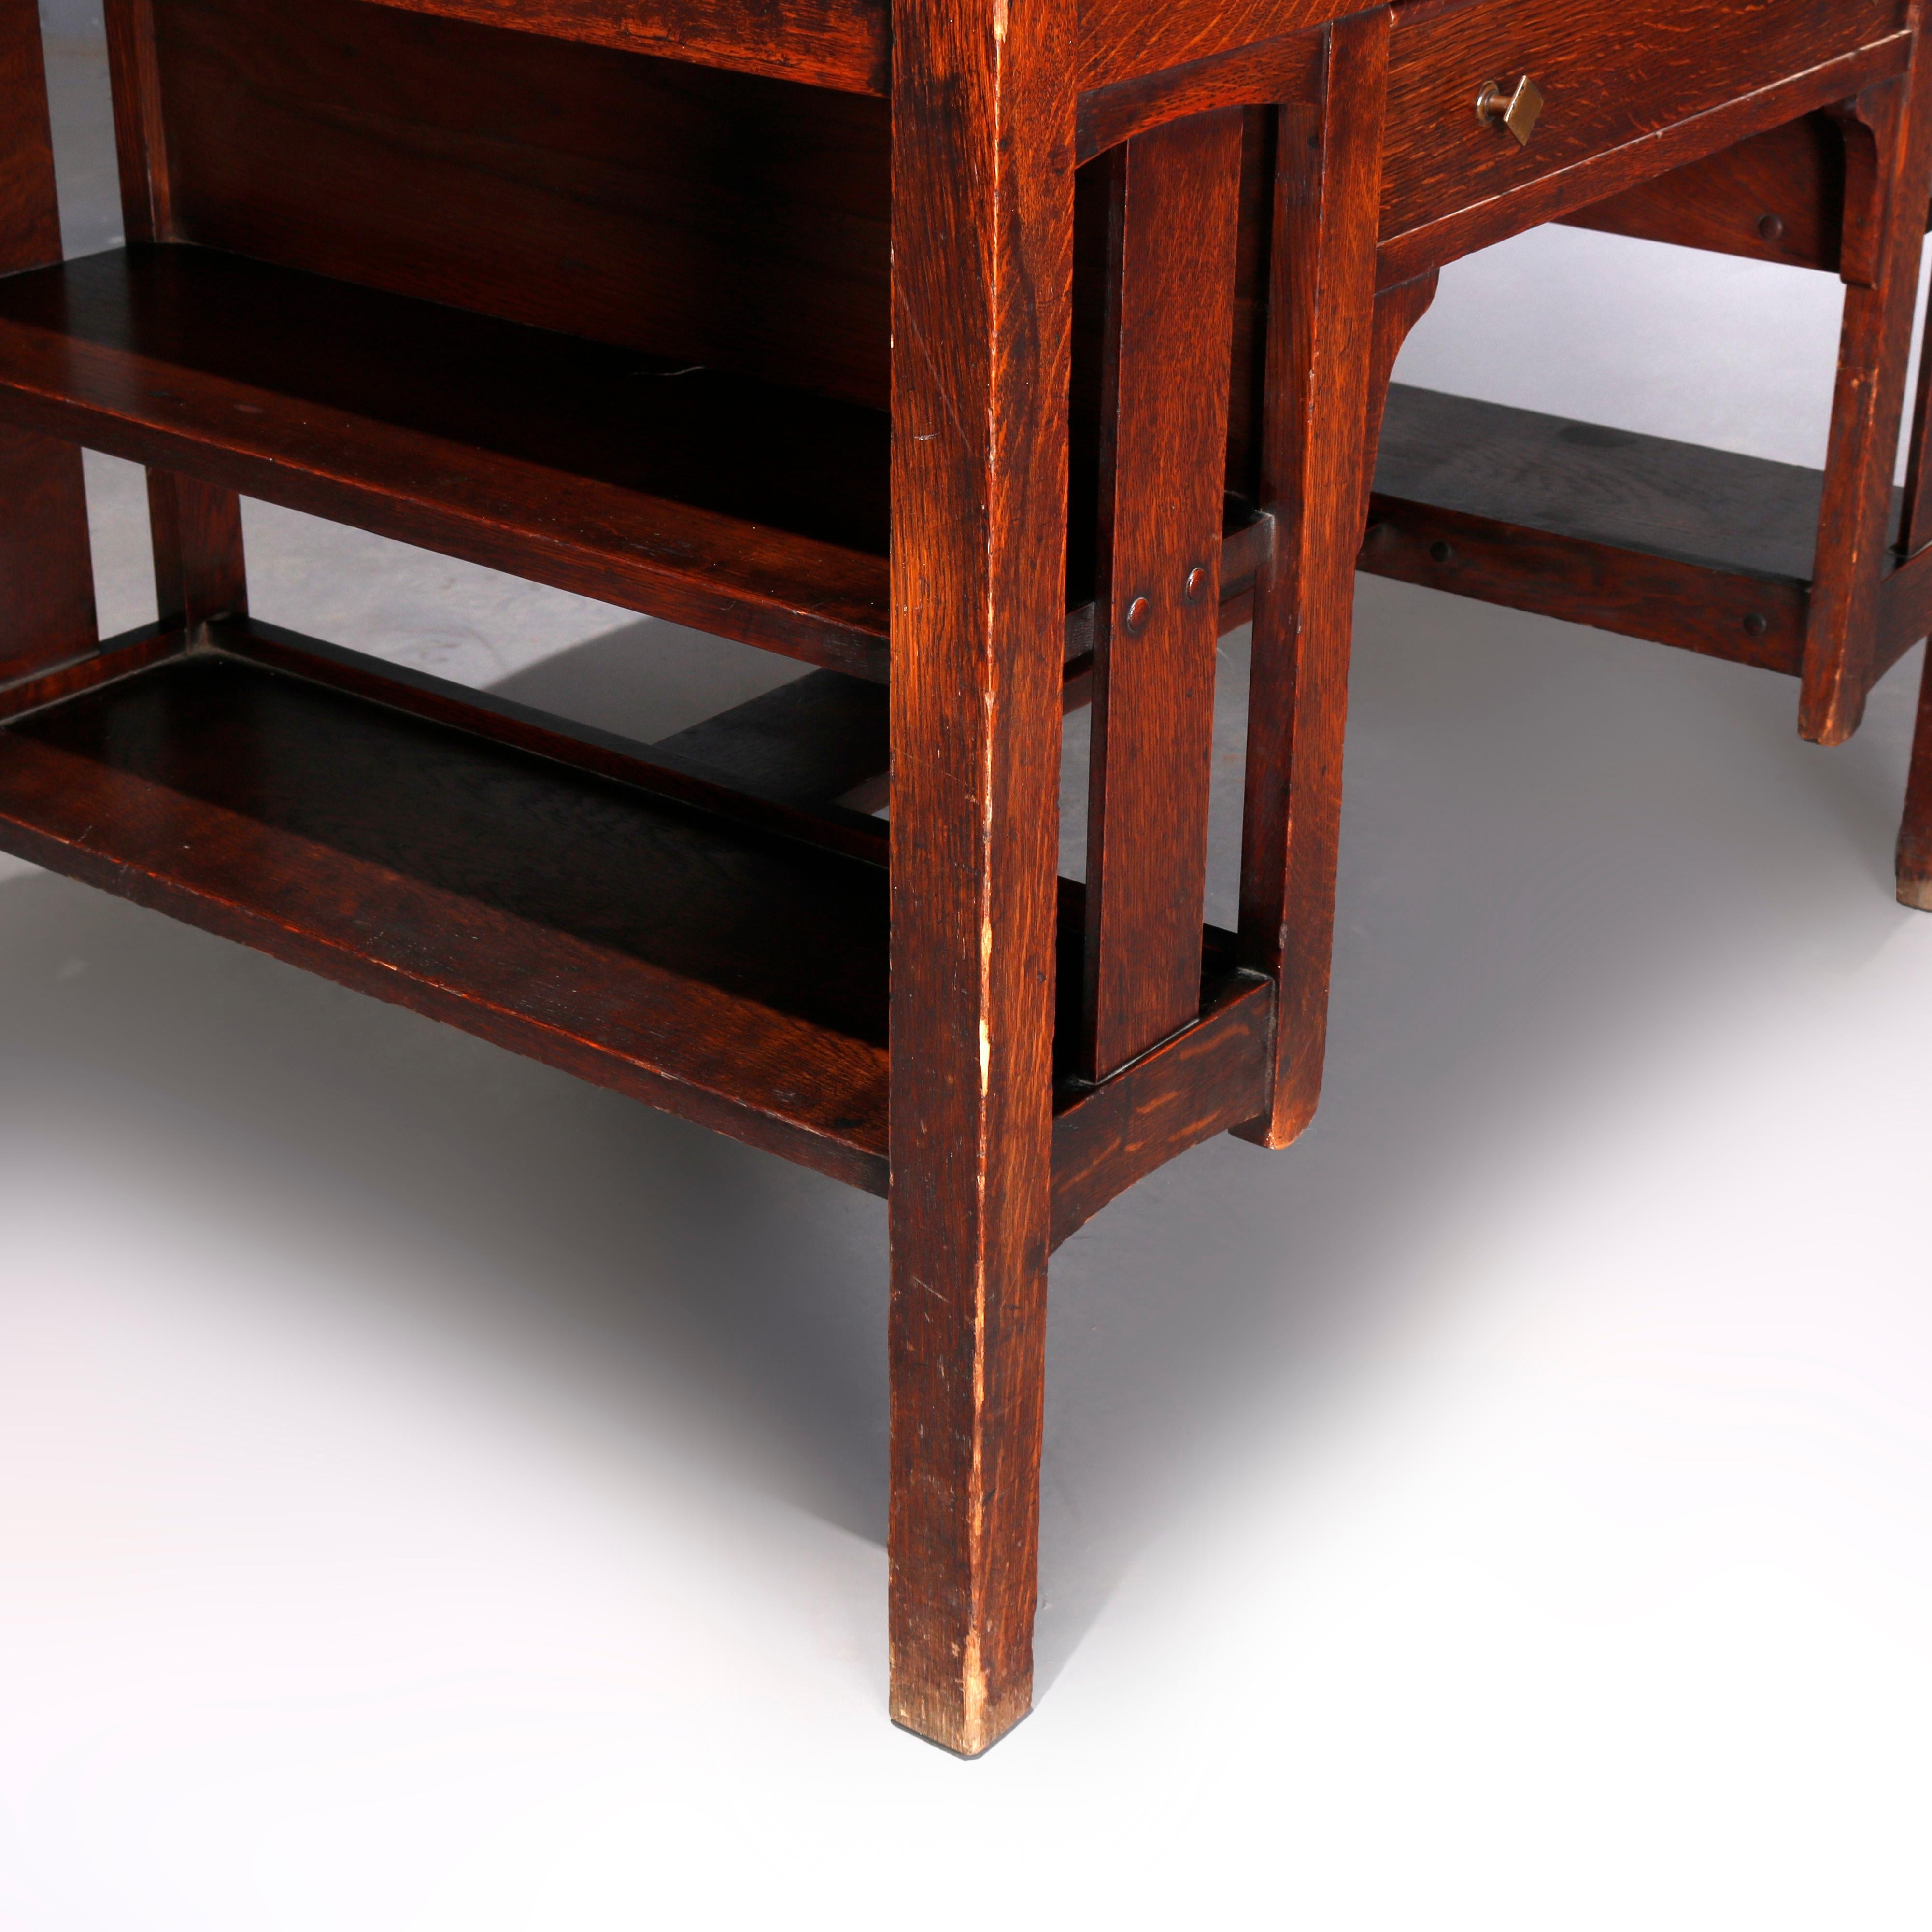 20th Century Antique Arts & Crafts Mission Oak Desk, Library Table, by Limbert, circa 1910